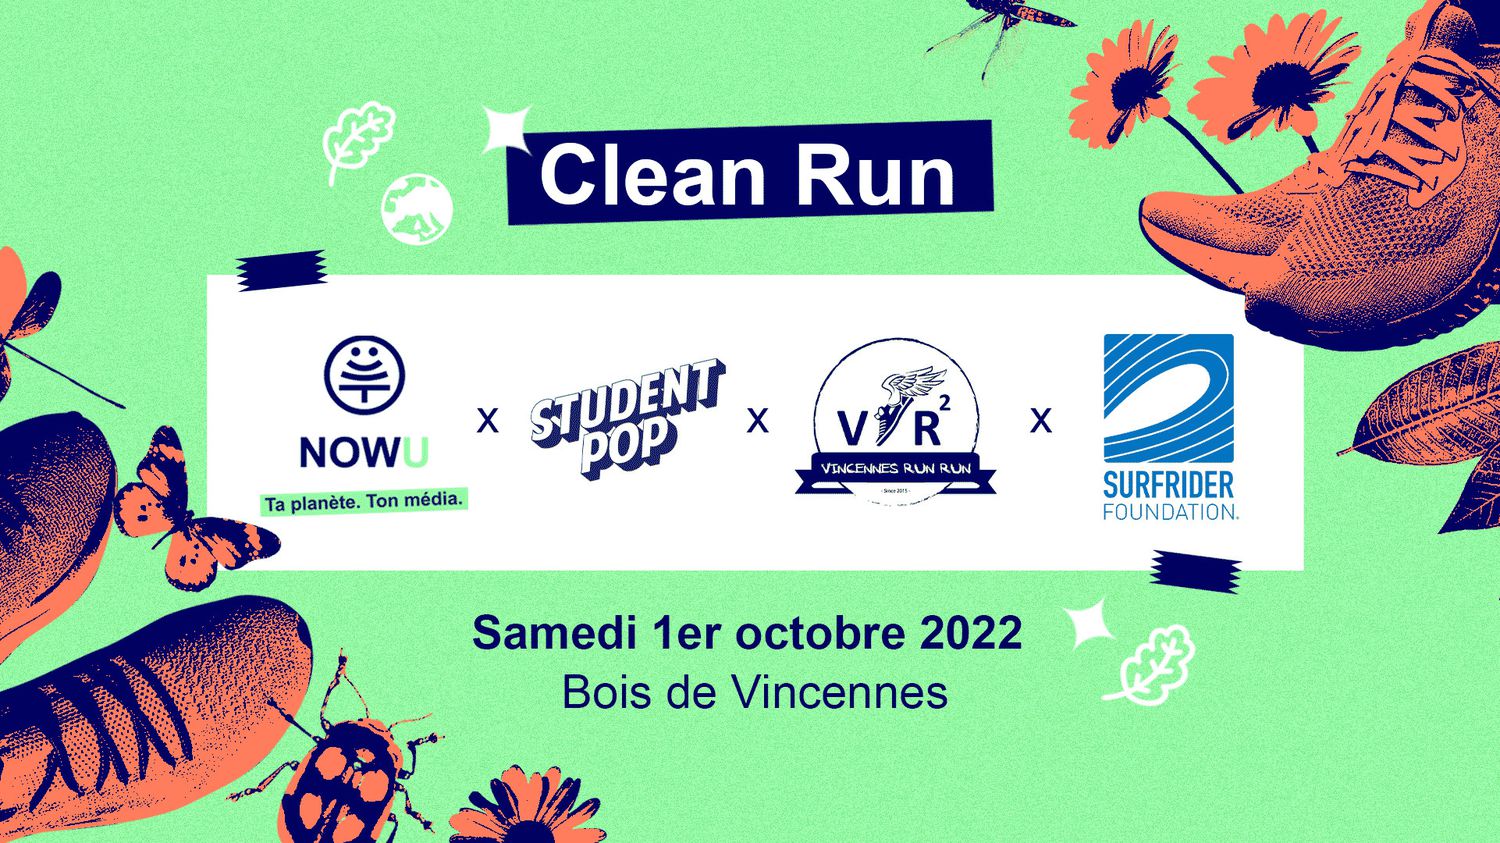 Sport and environment: NOWU organizes its first Clean Run in the Bois de Vincennes
